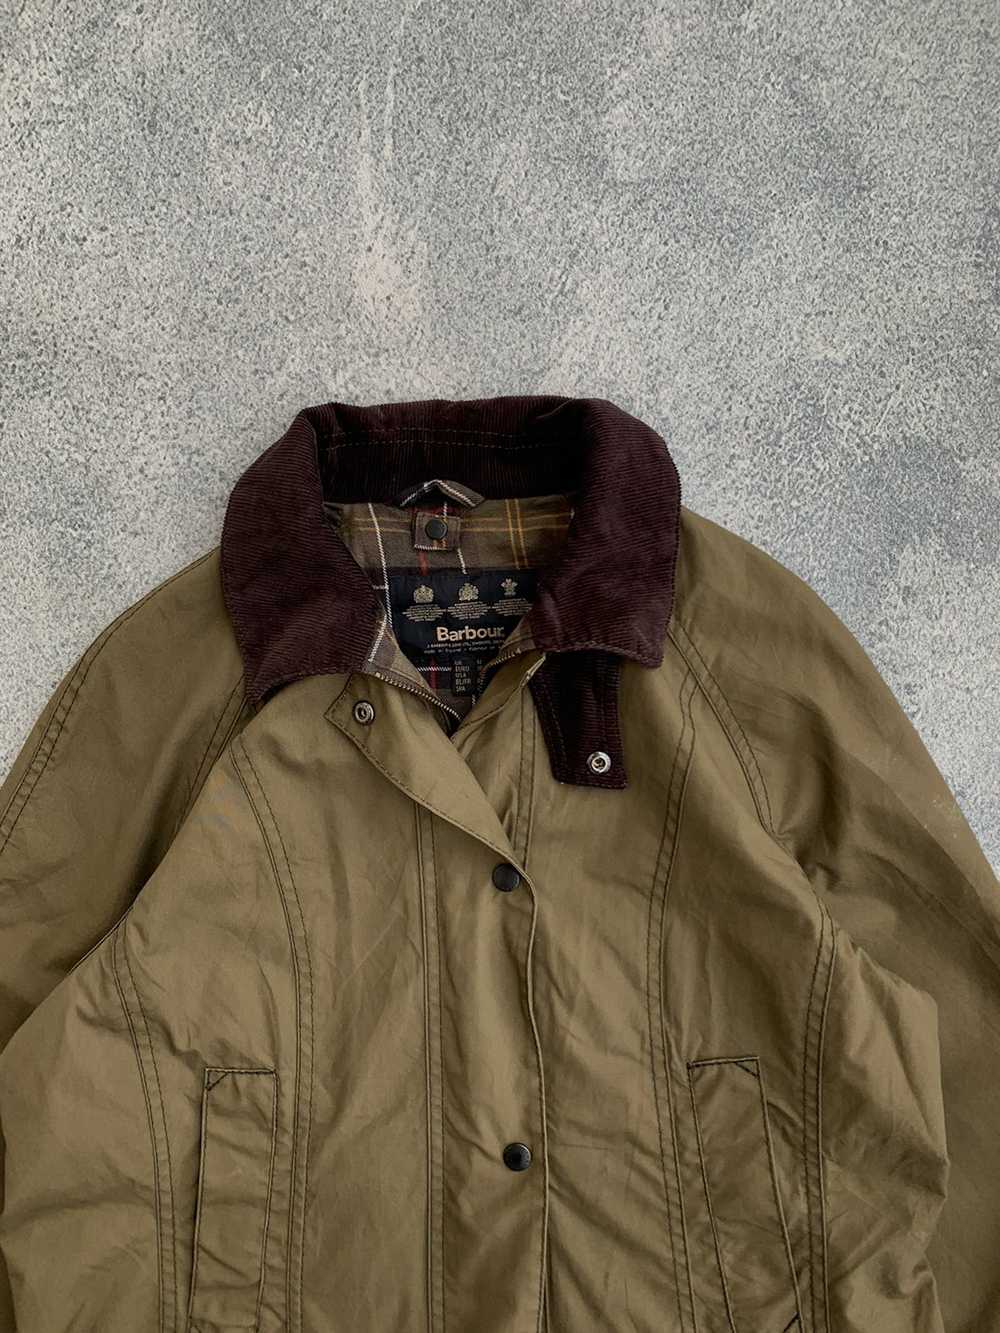 Barbour Barbour Beadnell Wax Jacket - image 2